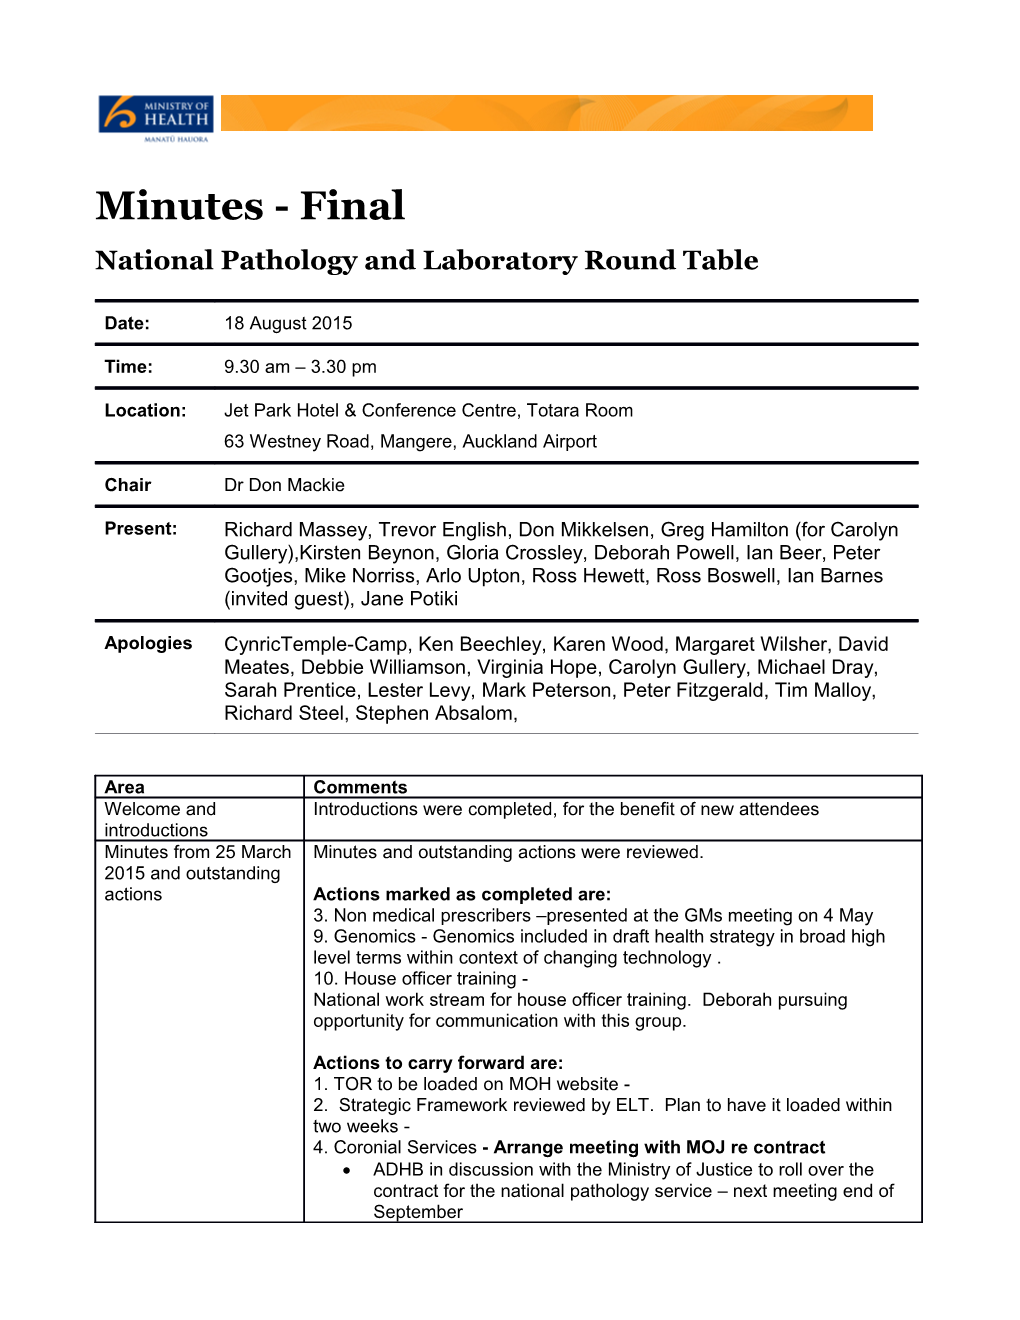 Minutes 18 August 2015: National Pathology and Laboratory Round Table